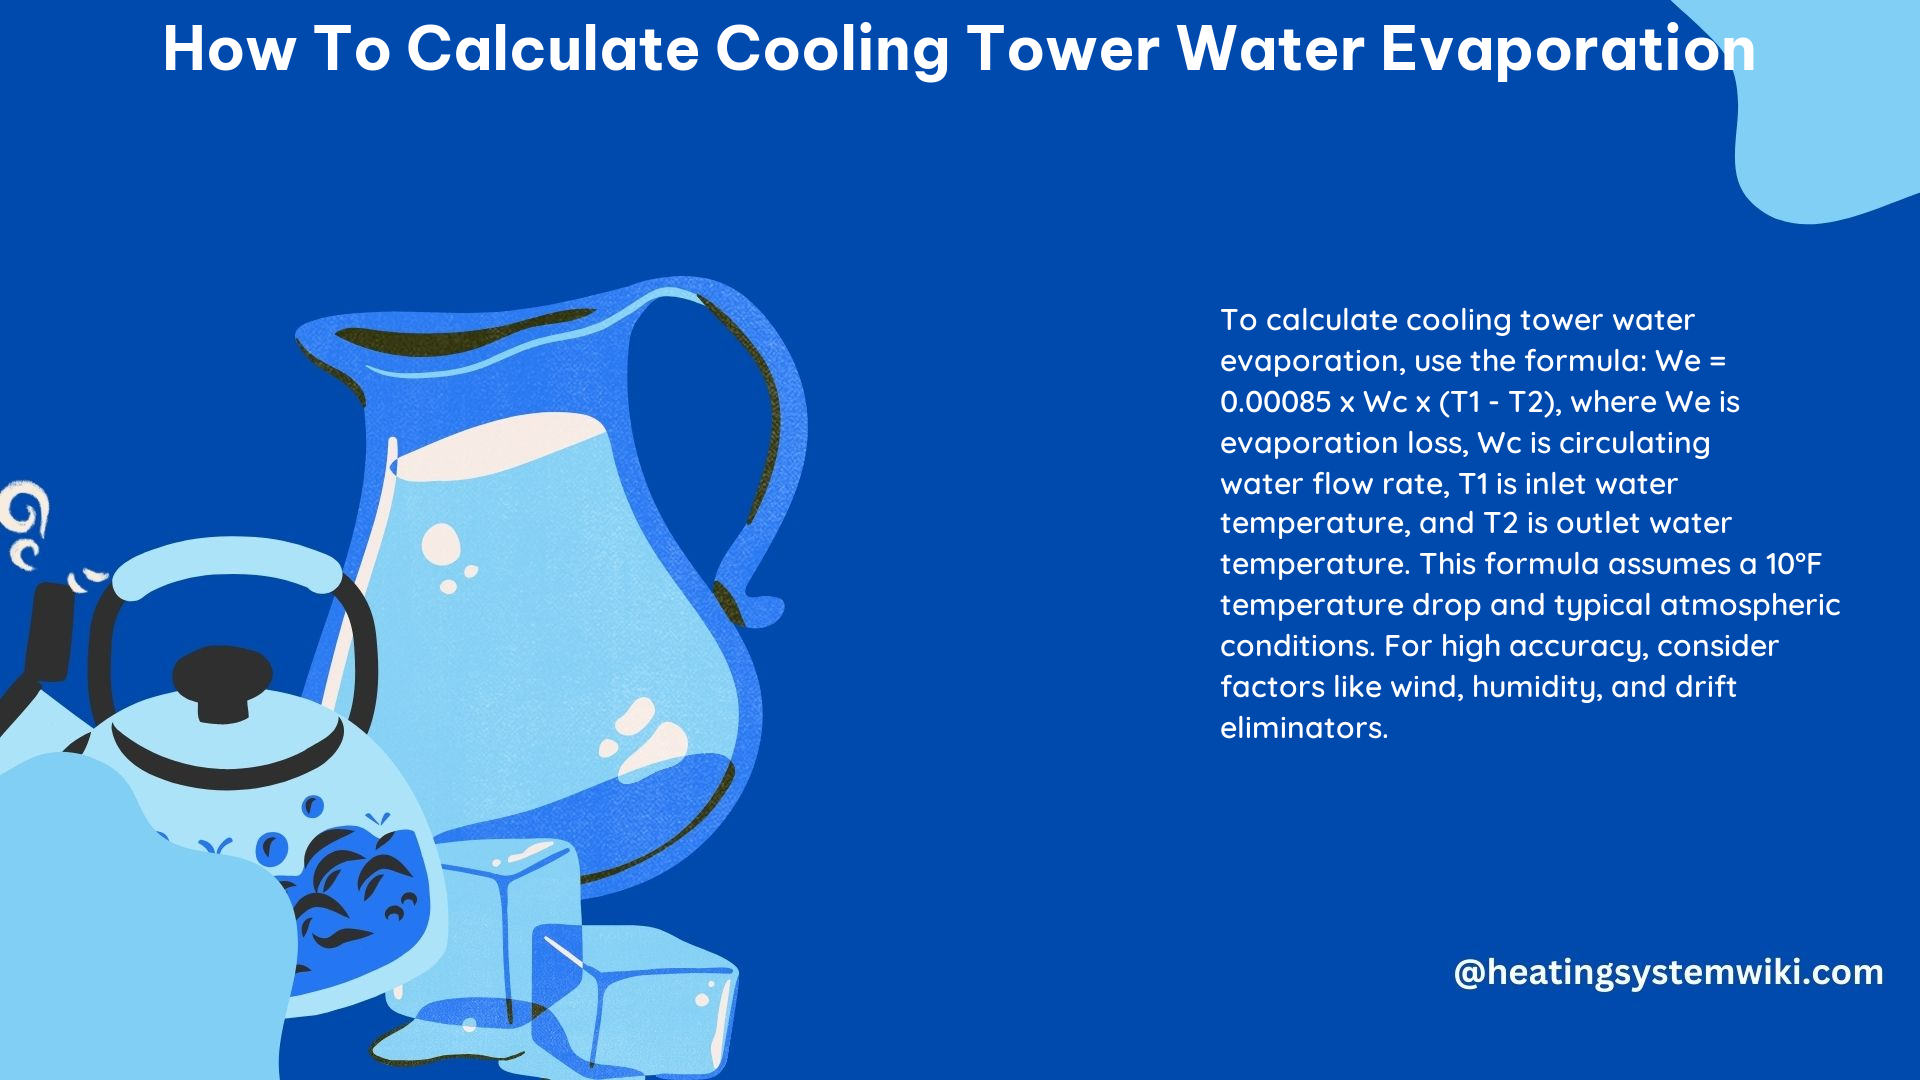 How to Calculate Cooling Tower Water Evaporation